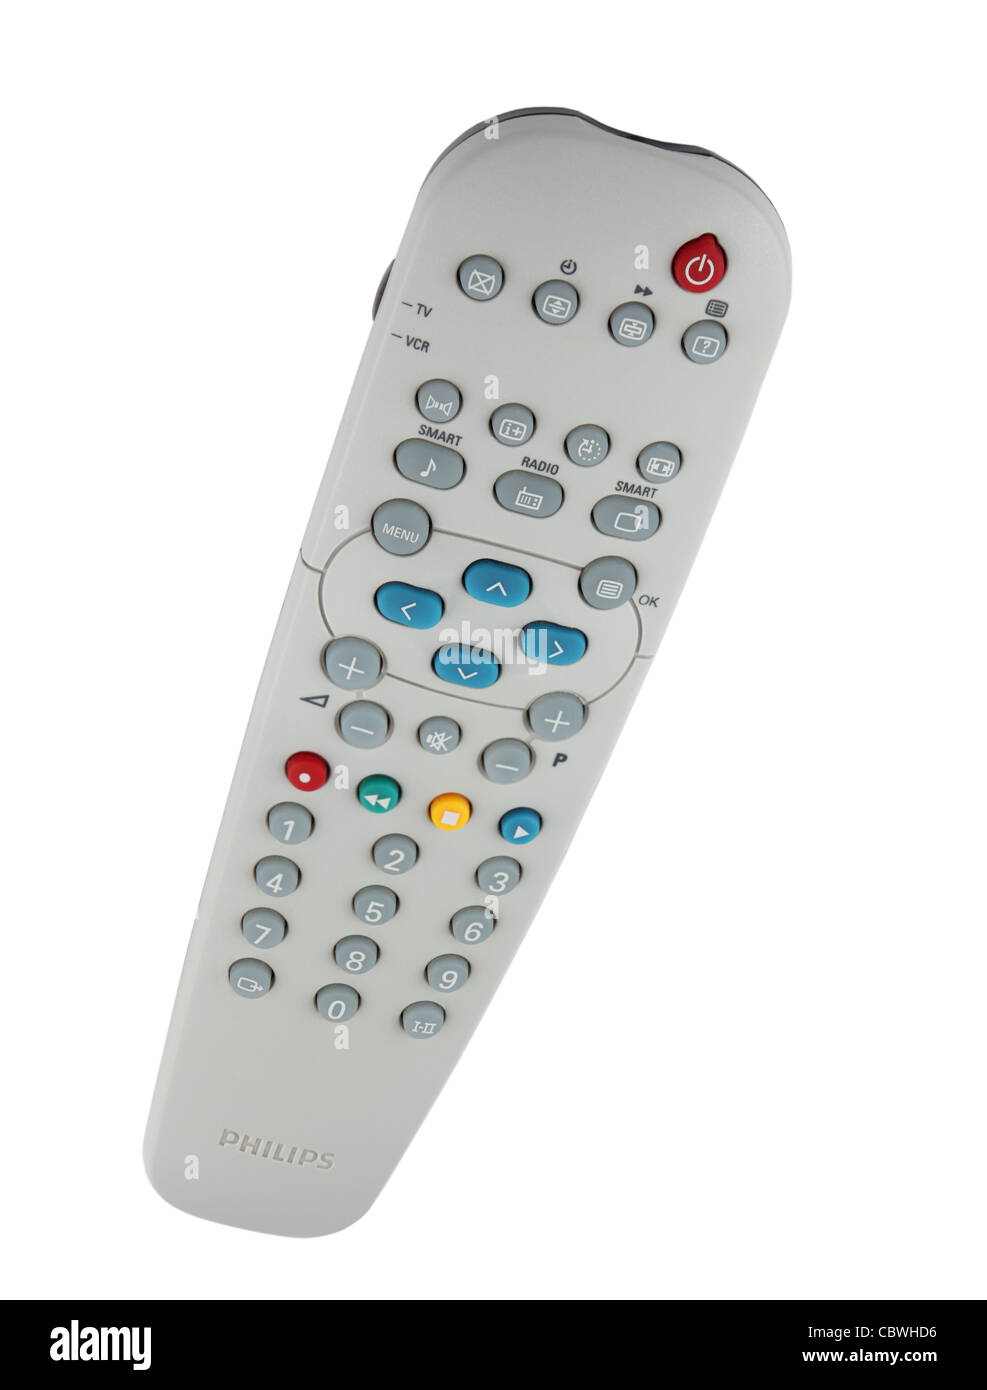 A Philips TV remote control device isolated on white background Stock Photo  - Alamy